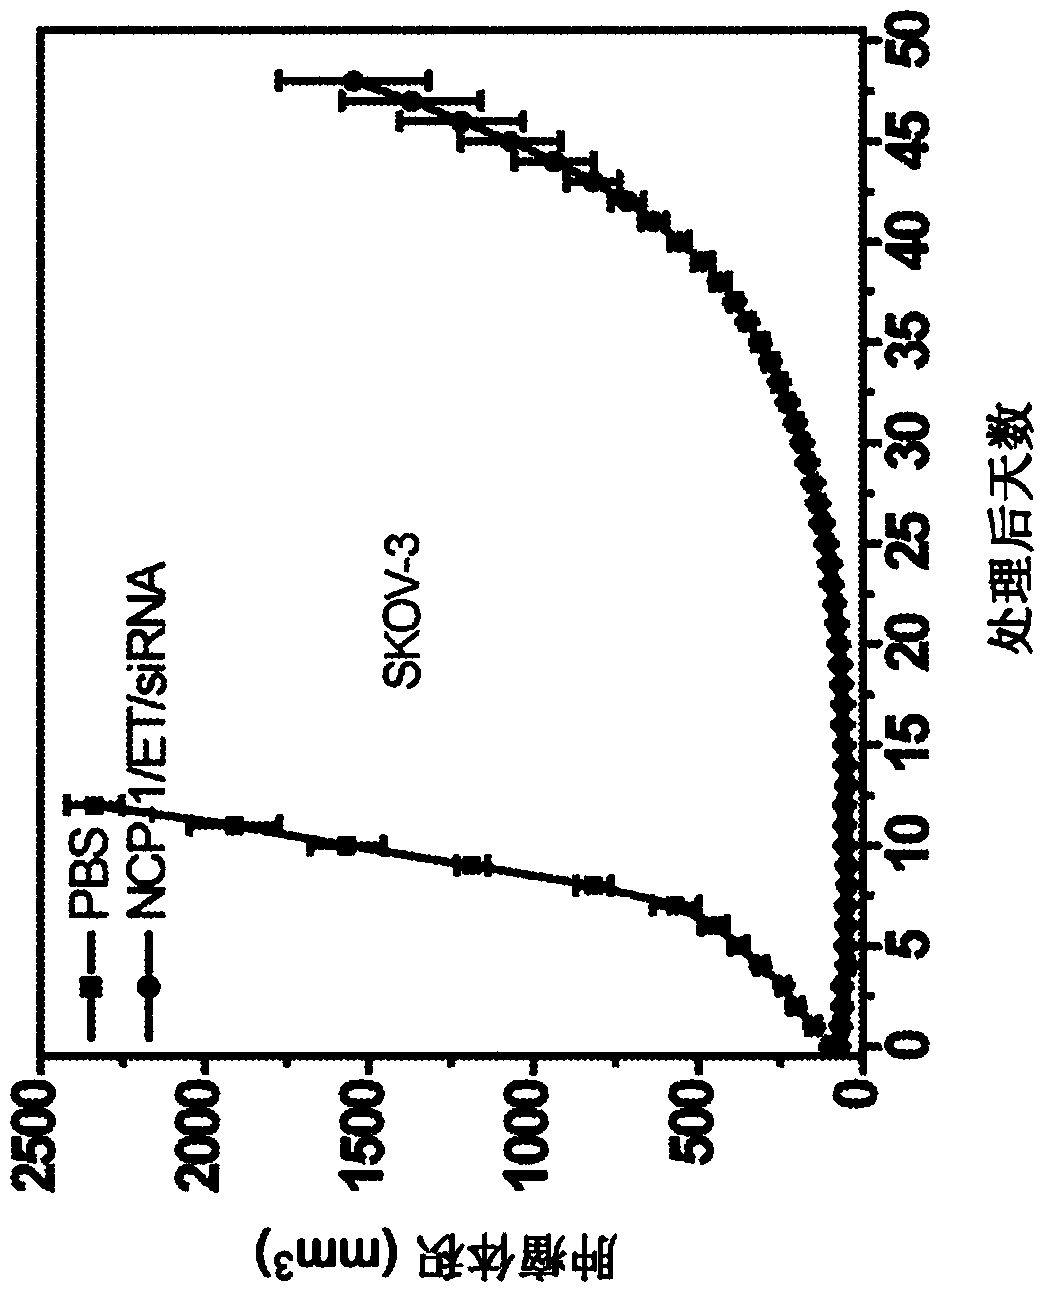 Nanoparticles for chemotherapy, targeted therapy, photodynamic therapy, immunotherapy, and any combination thereof